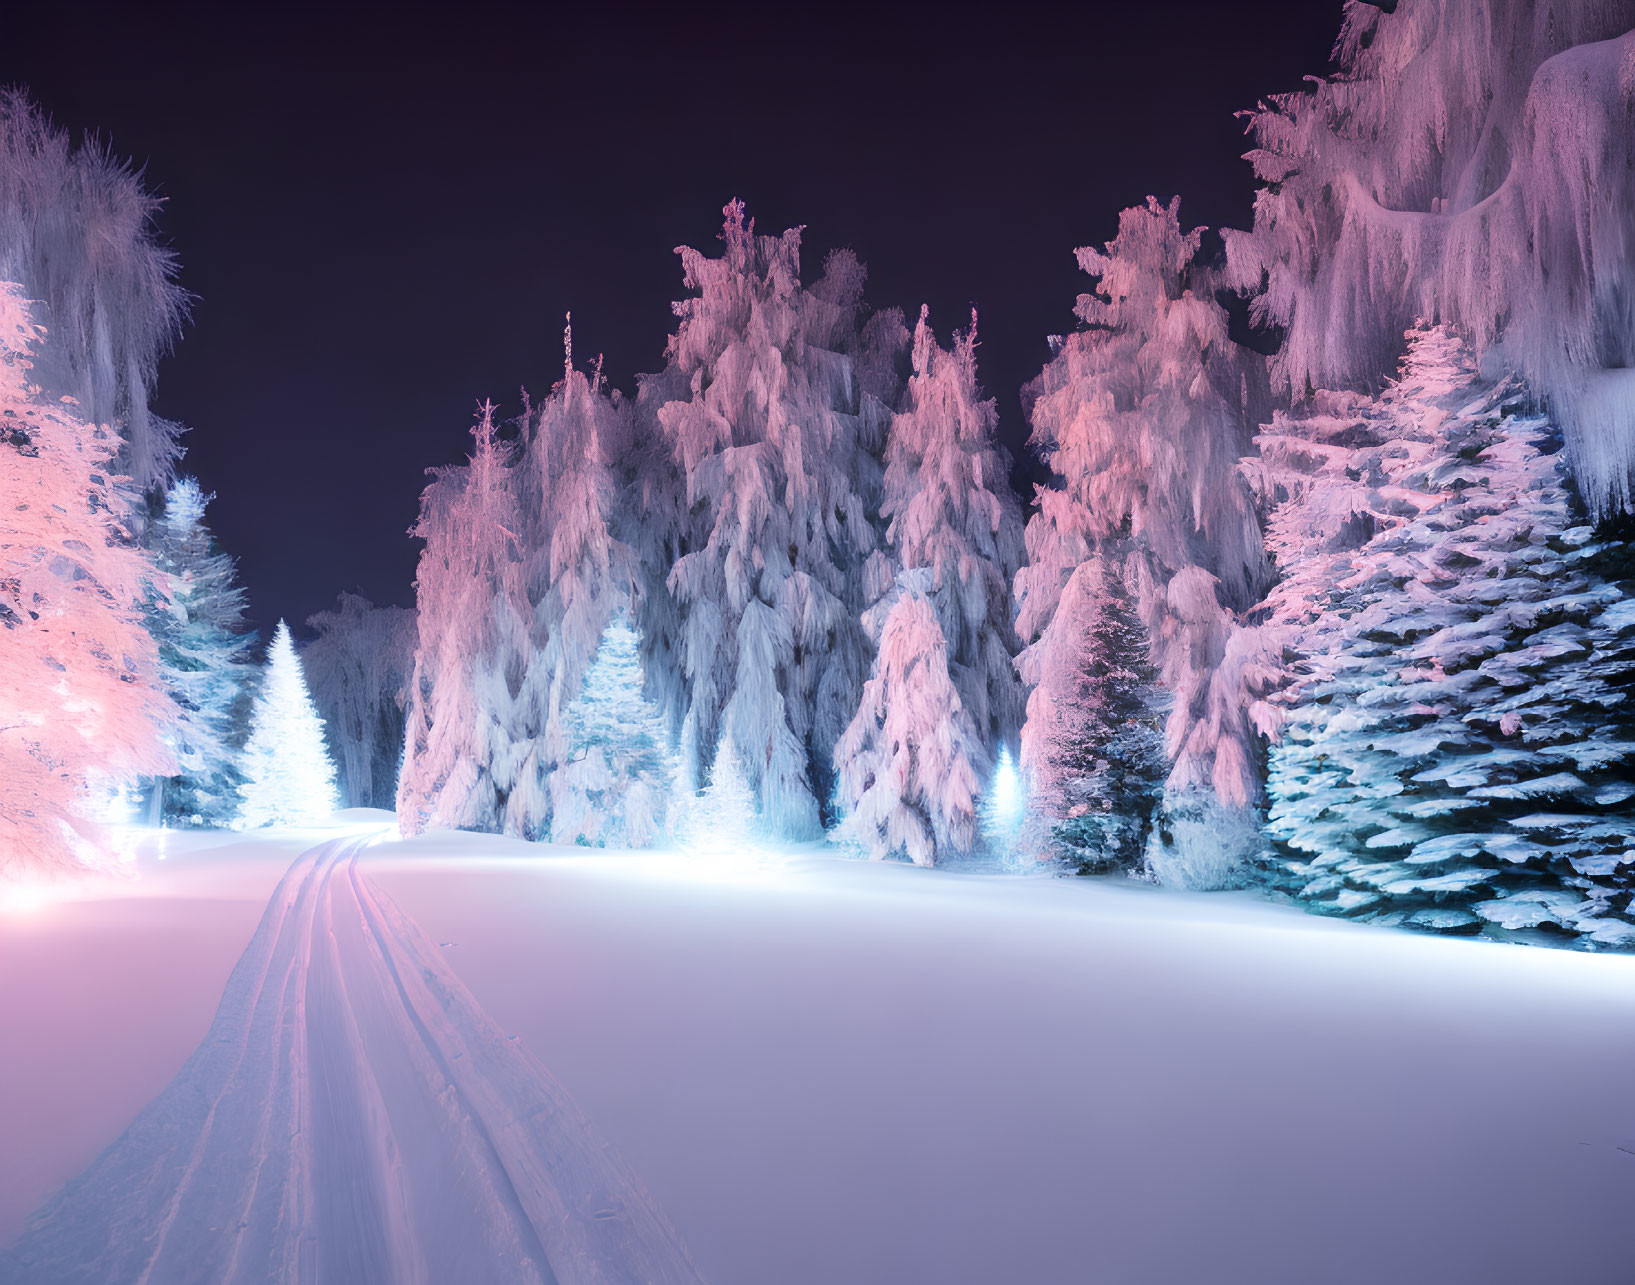 Snowy Trees and Blue-Lit Path in Tranquil Winter Night